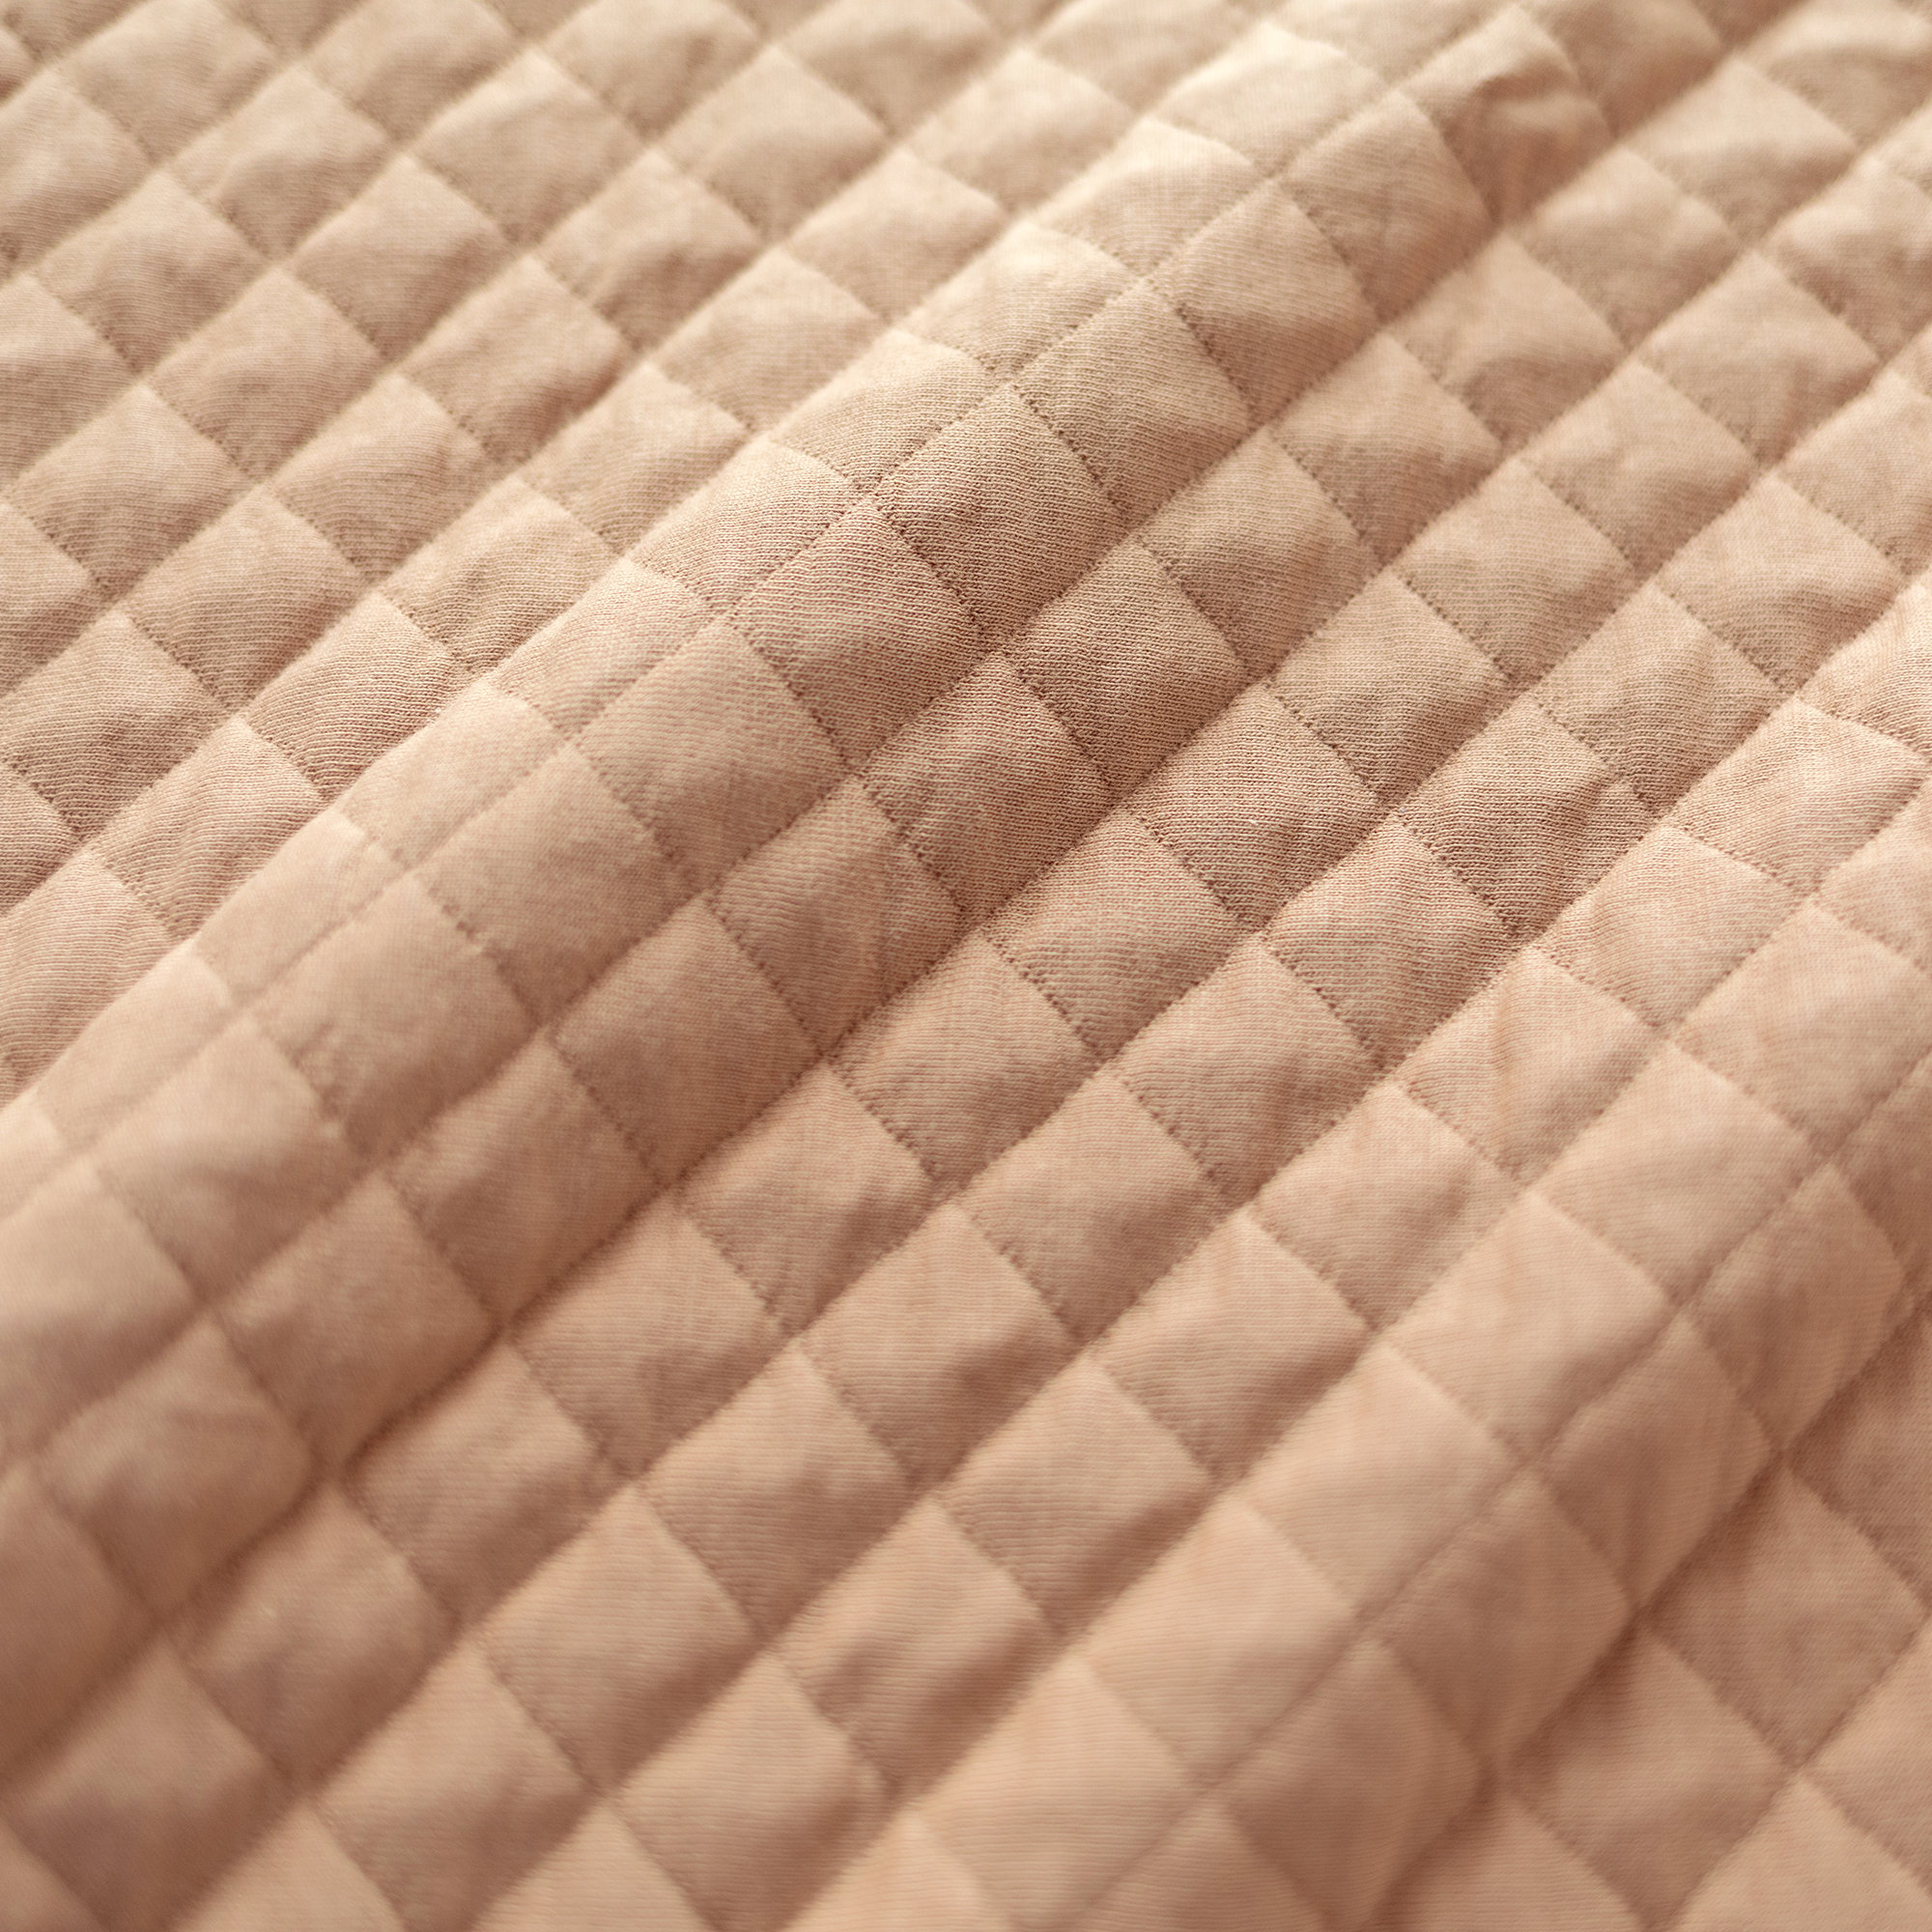 Blanket Pady quilted jersey 75x100cm QUILT Beige tog 1.5[BEDDING]